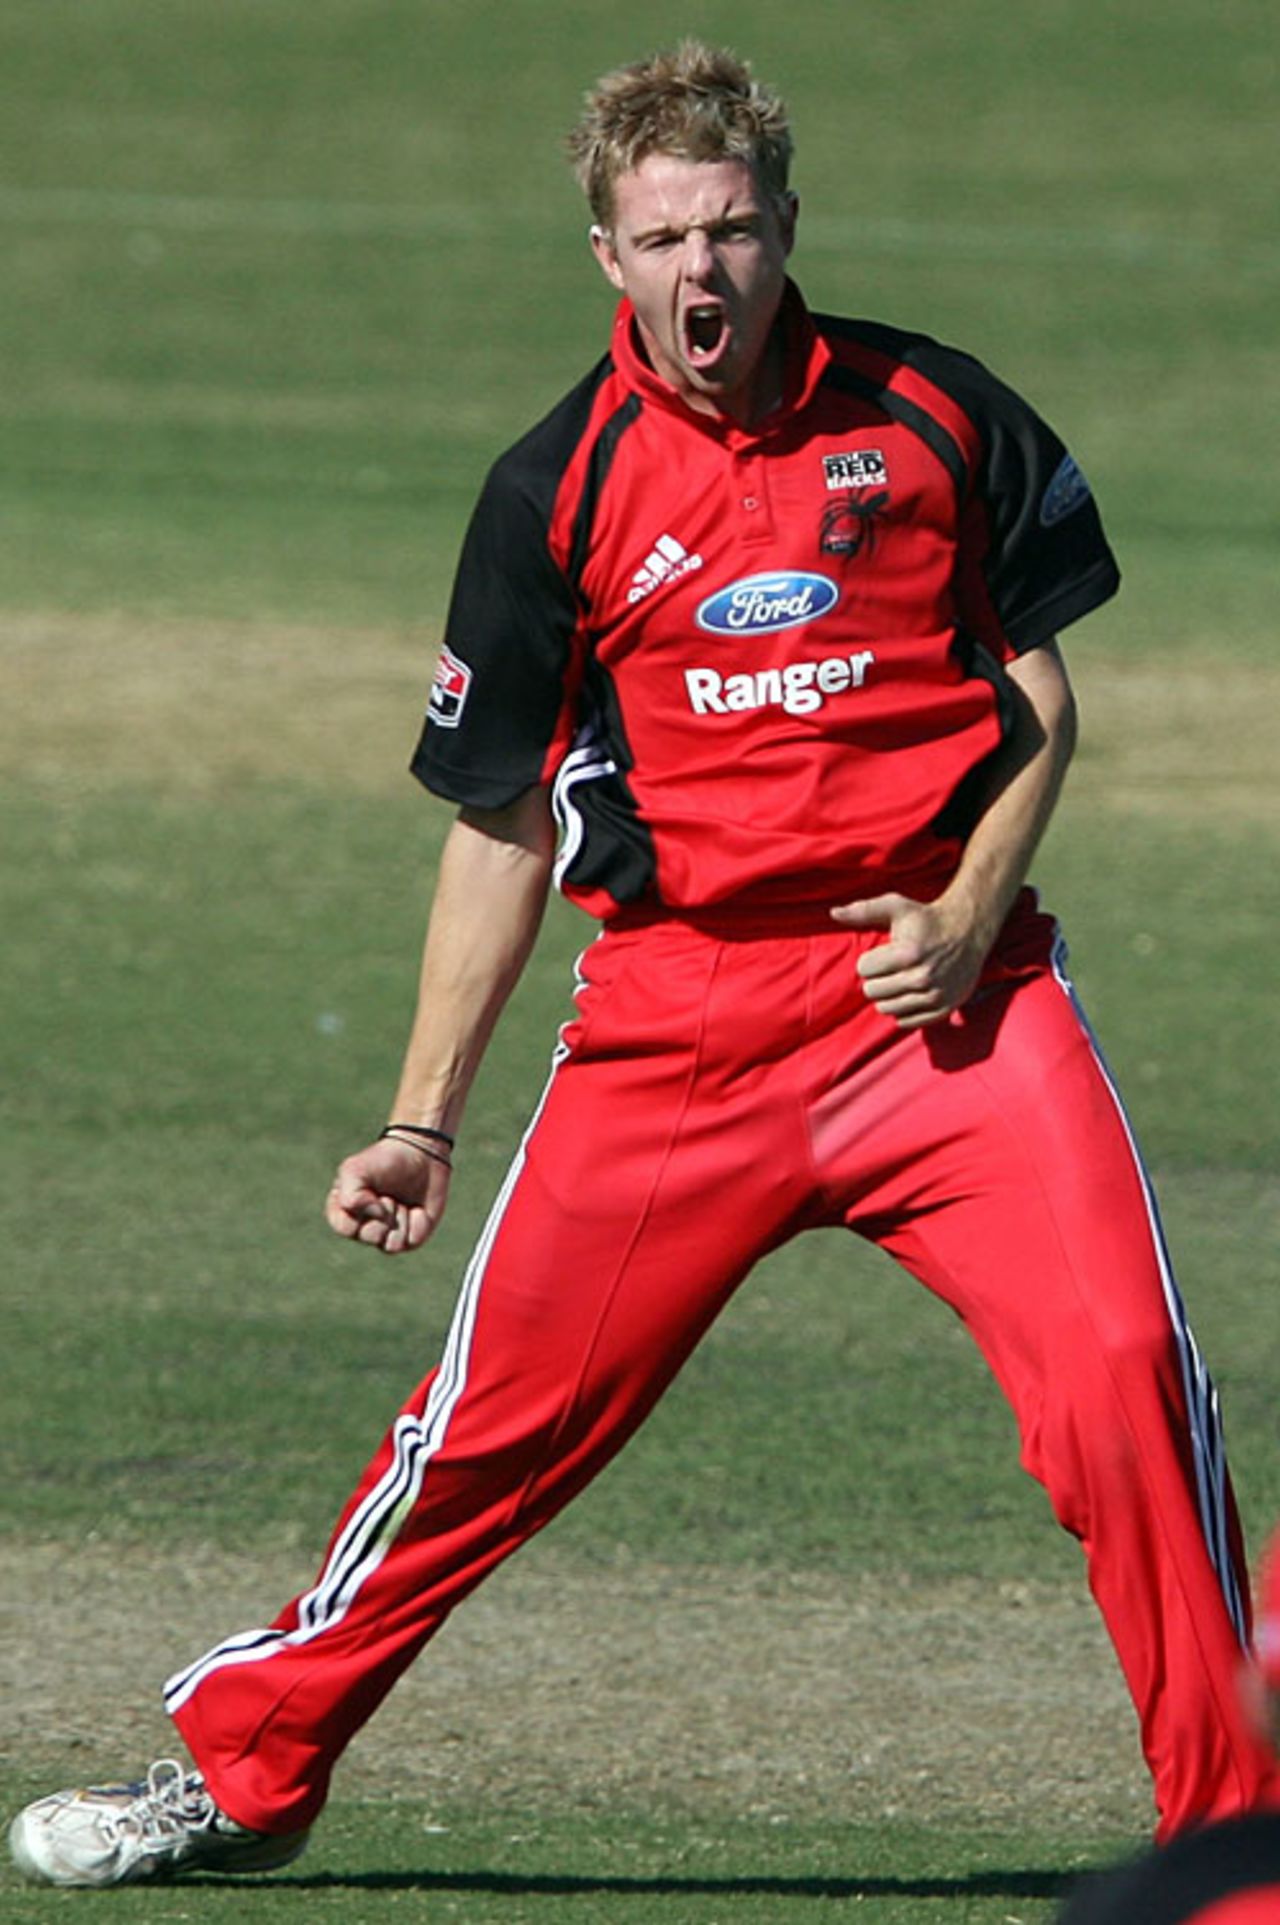 Dan Cullen took 2 for 44 against Victoria, South Australia v Victoria, Ford Ranger Cup, Adelaide, October 19, 2007